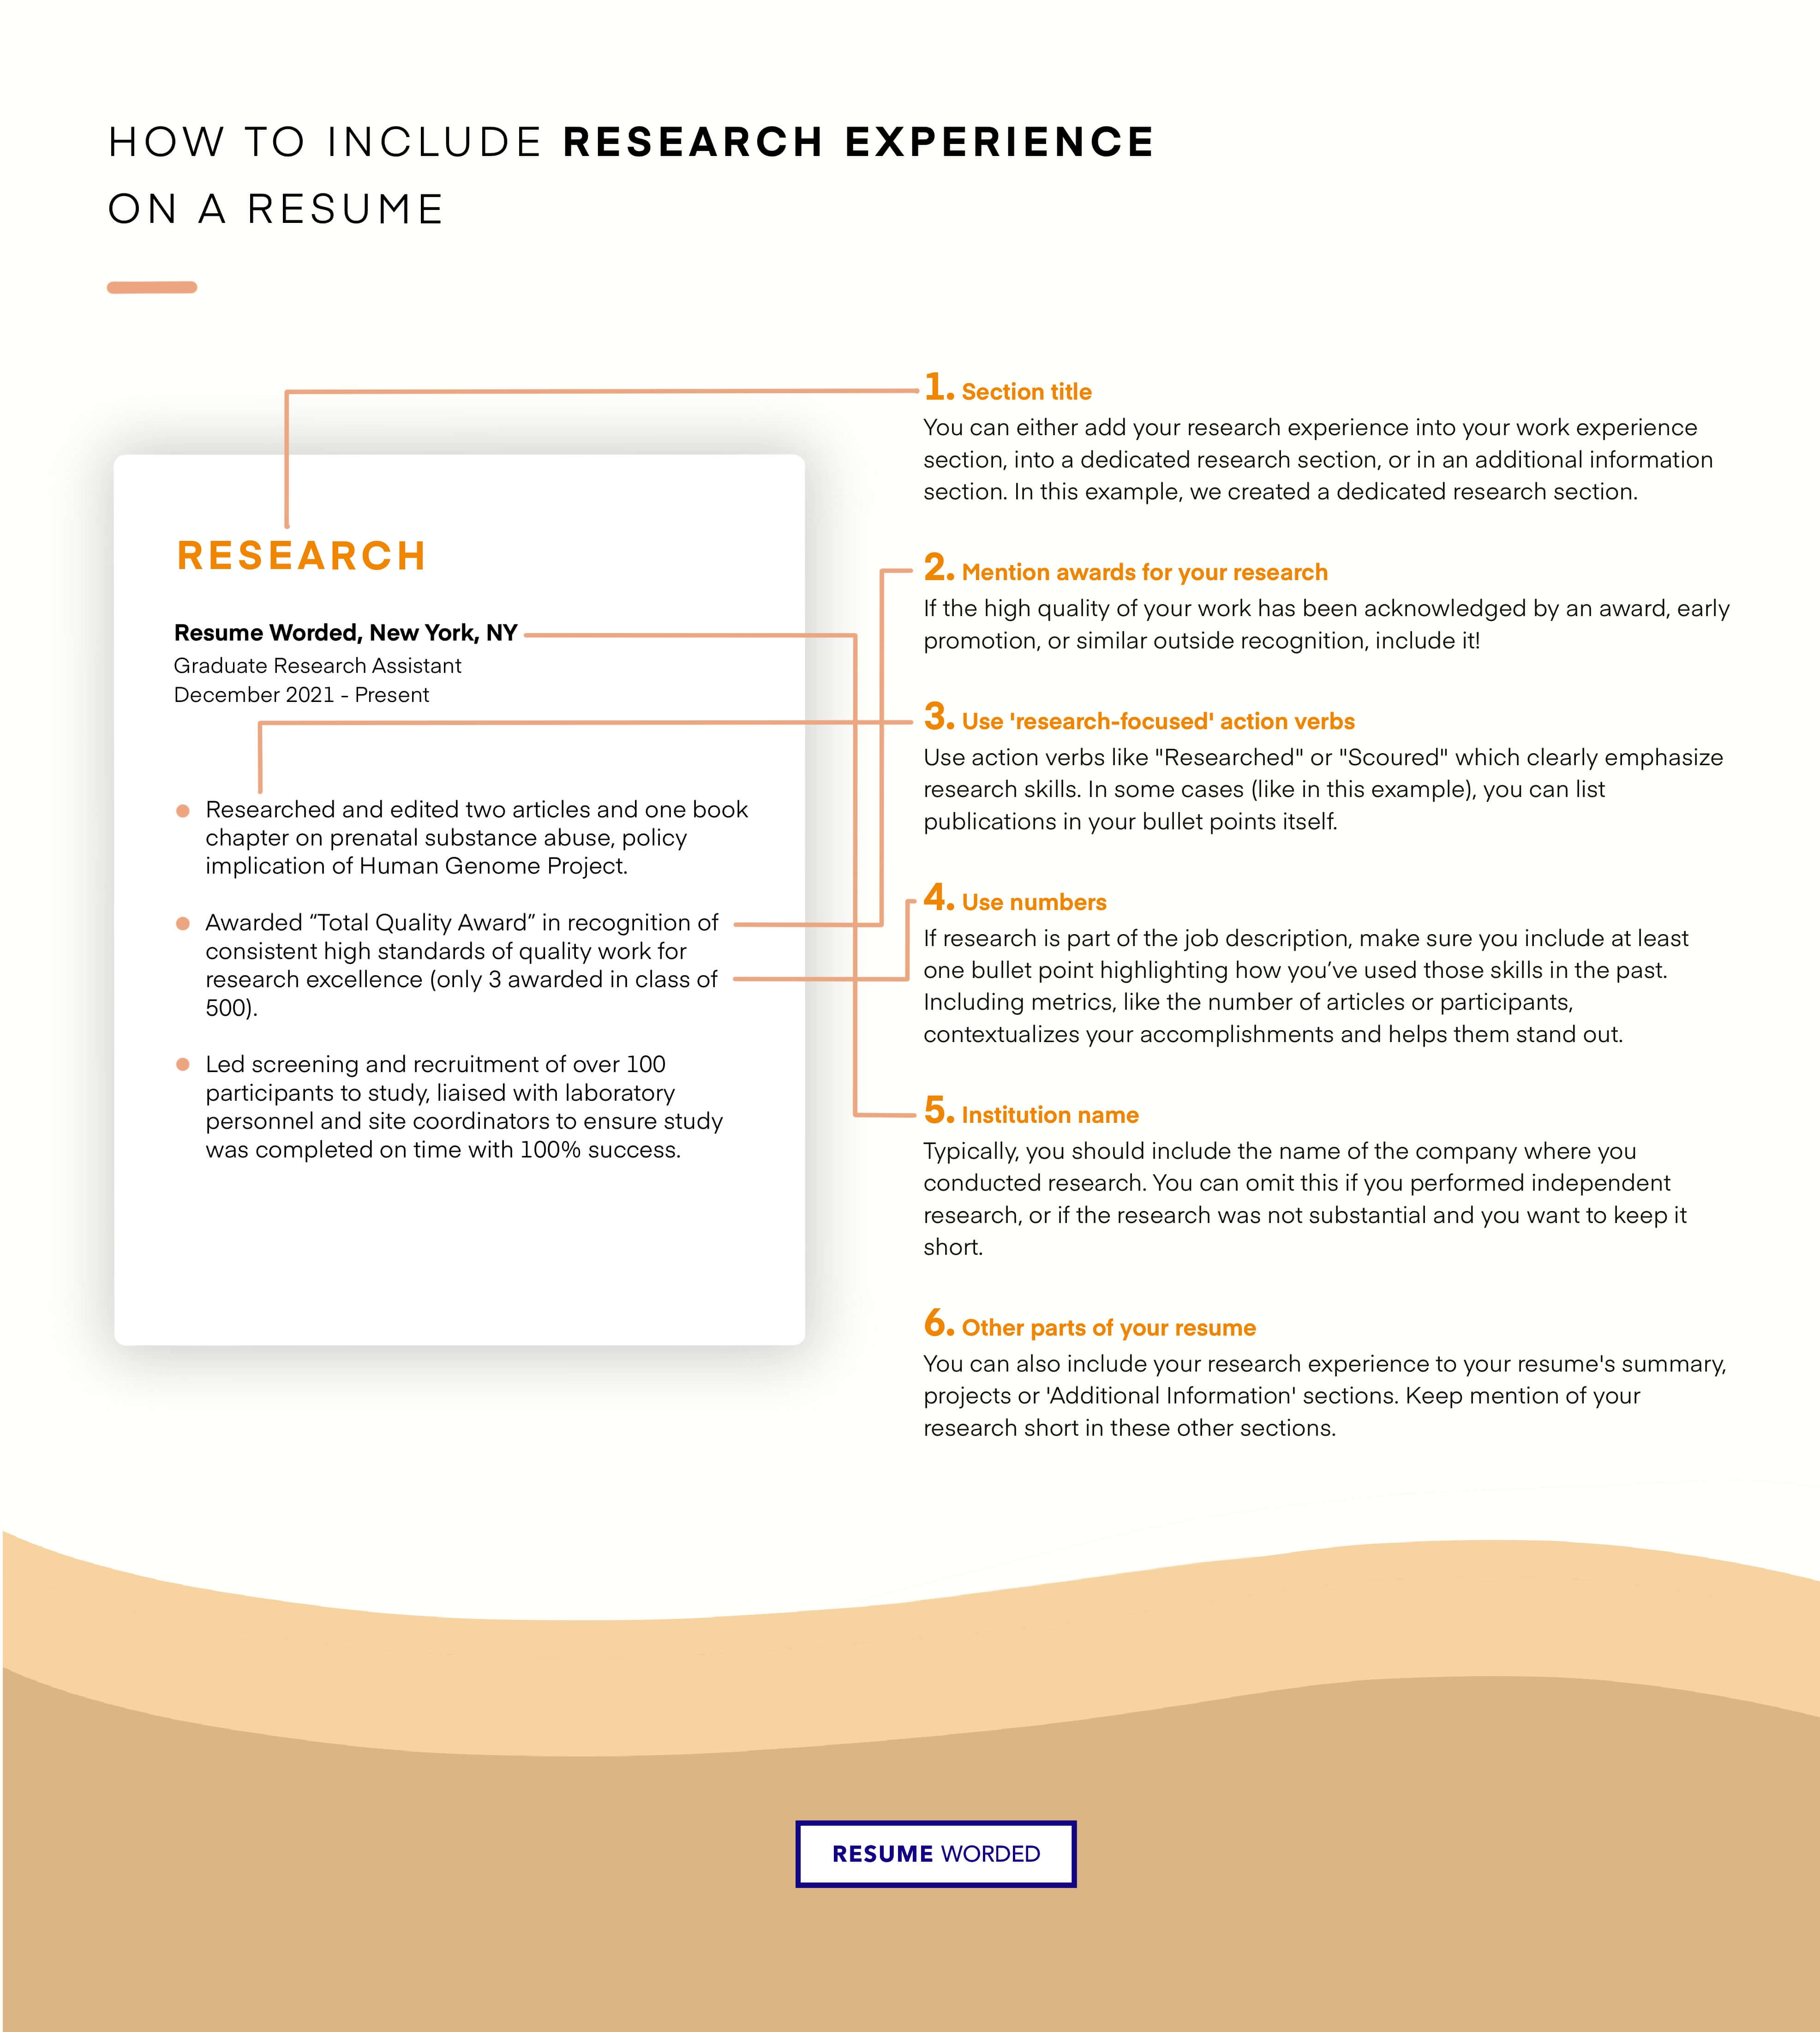 Show your knack for market research - Senior Product Manager CV